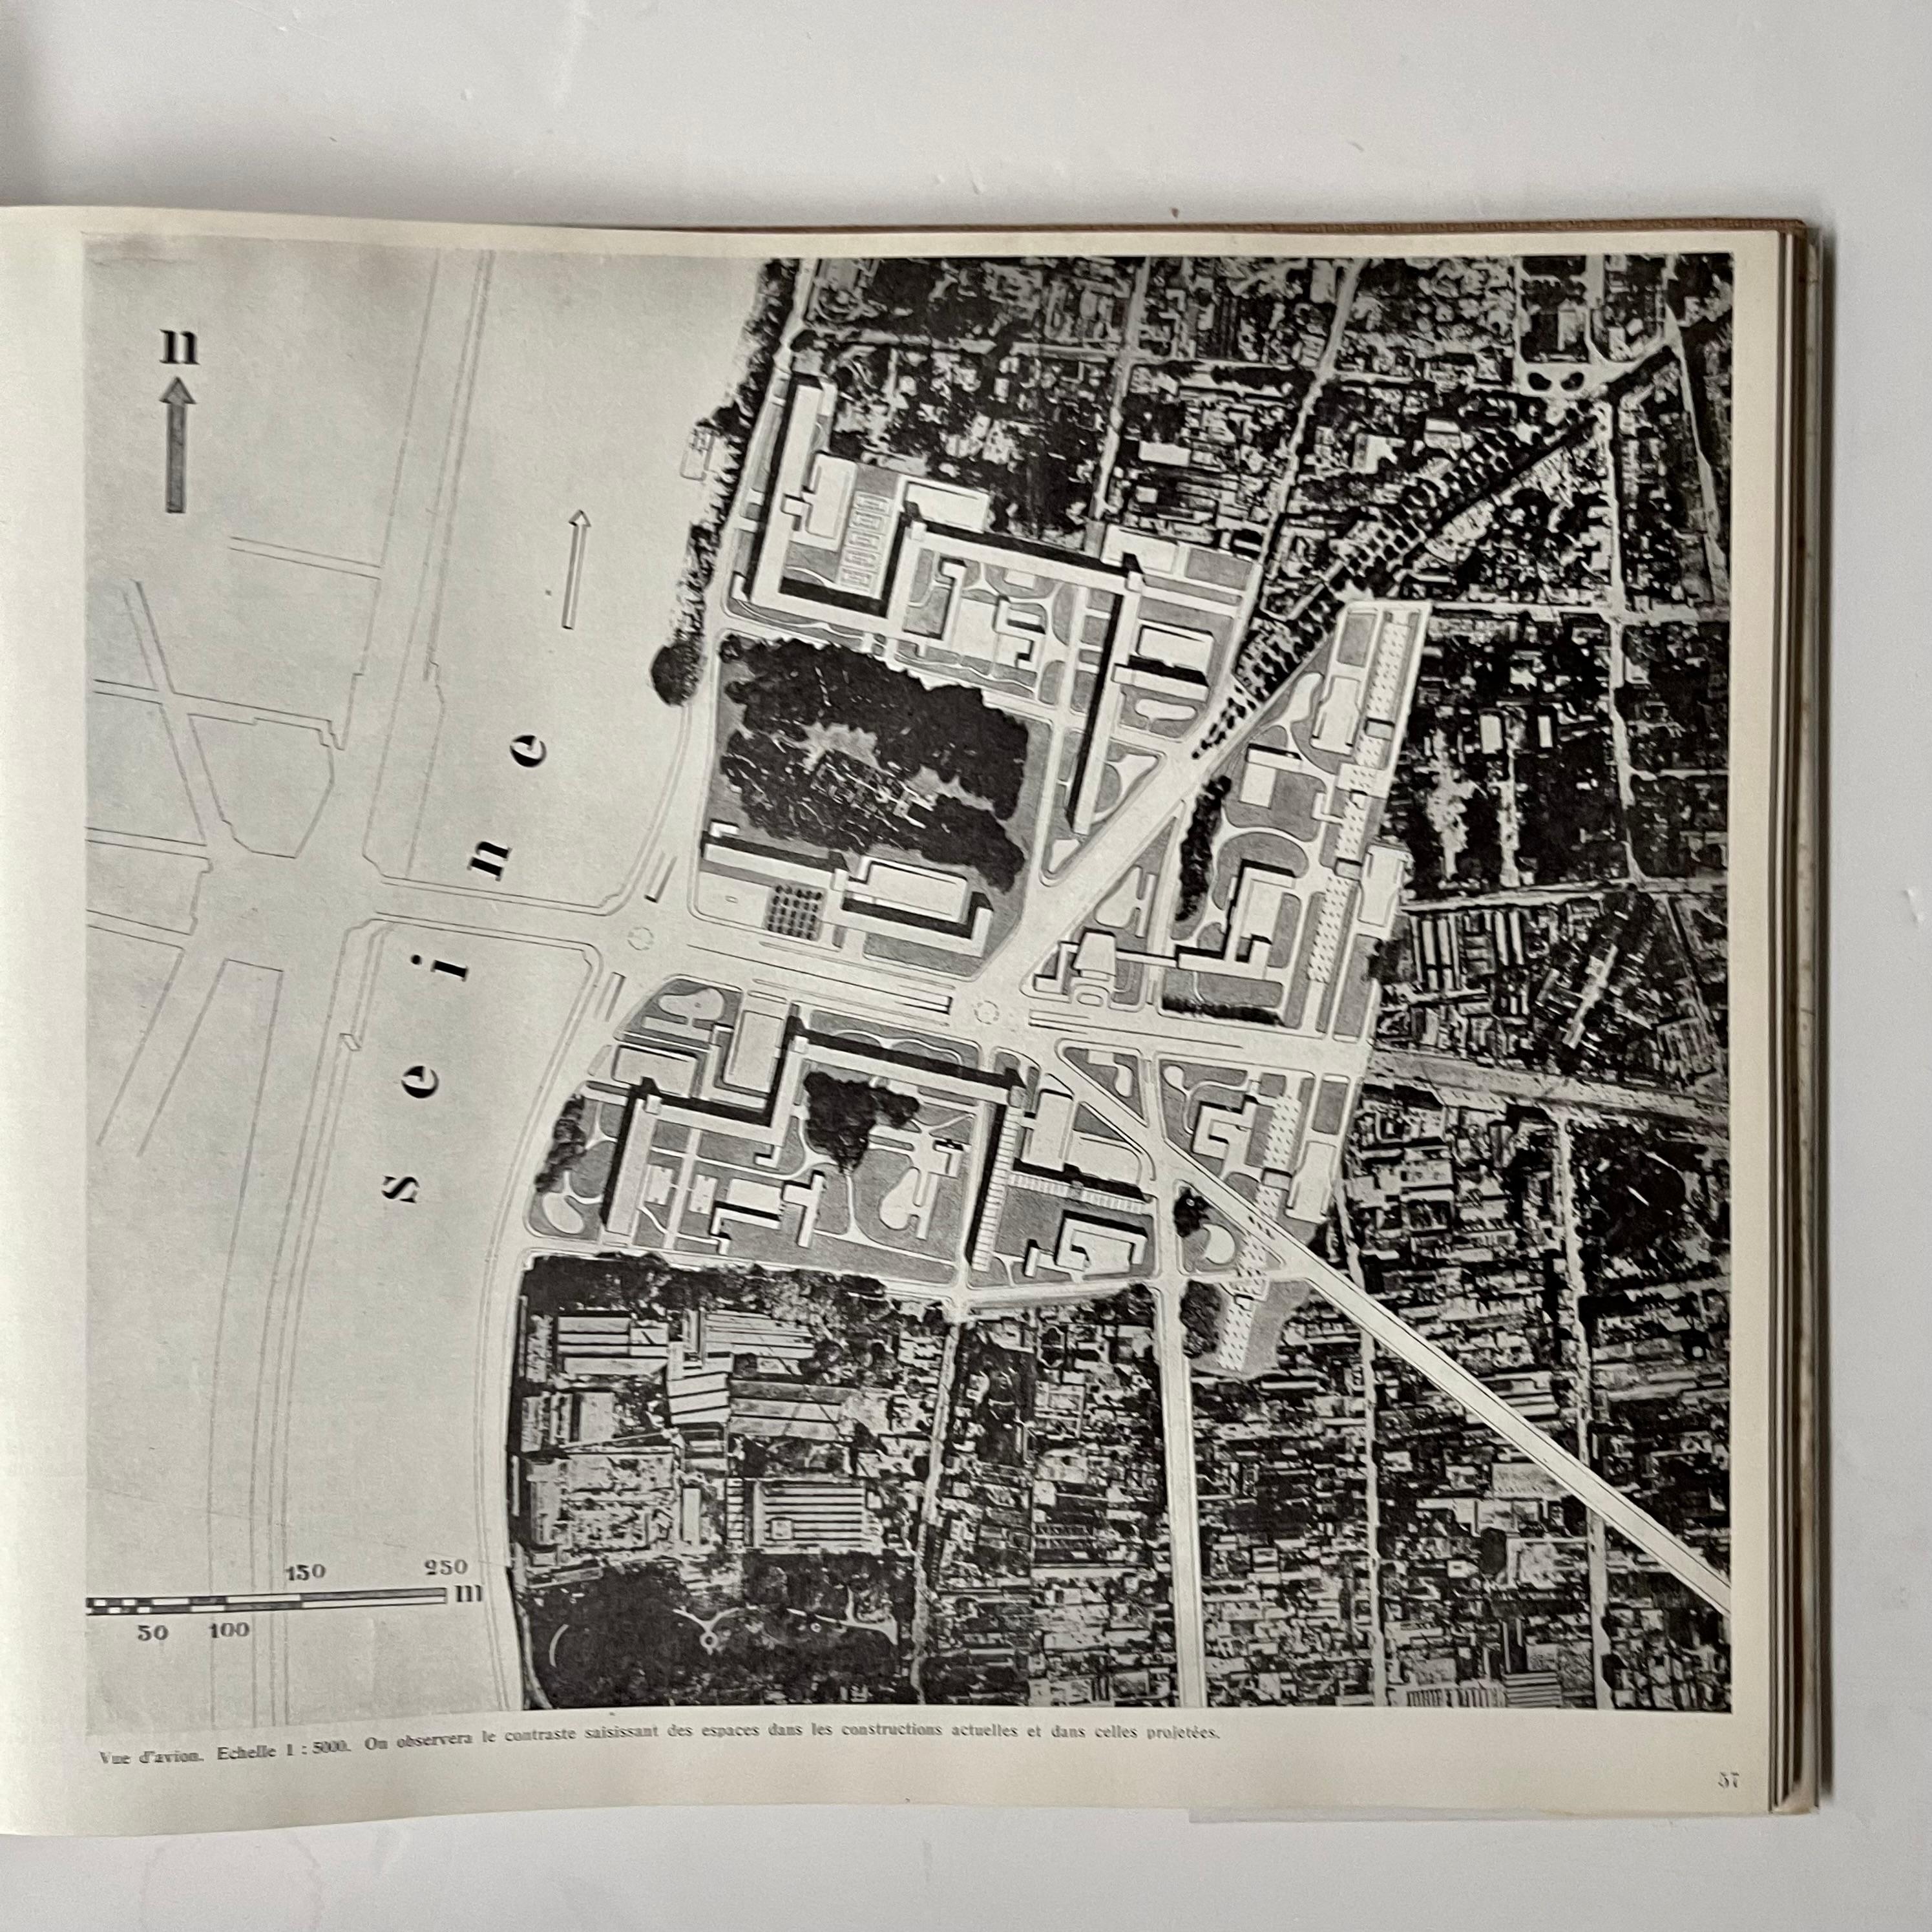 Published by Les Editions d’Architecture Erlenbac Zurich this is the third edition of the 1939 original – but the design was not changed.

Condition very good/ dust jacket very good
protected by a mylar cover